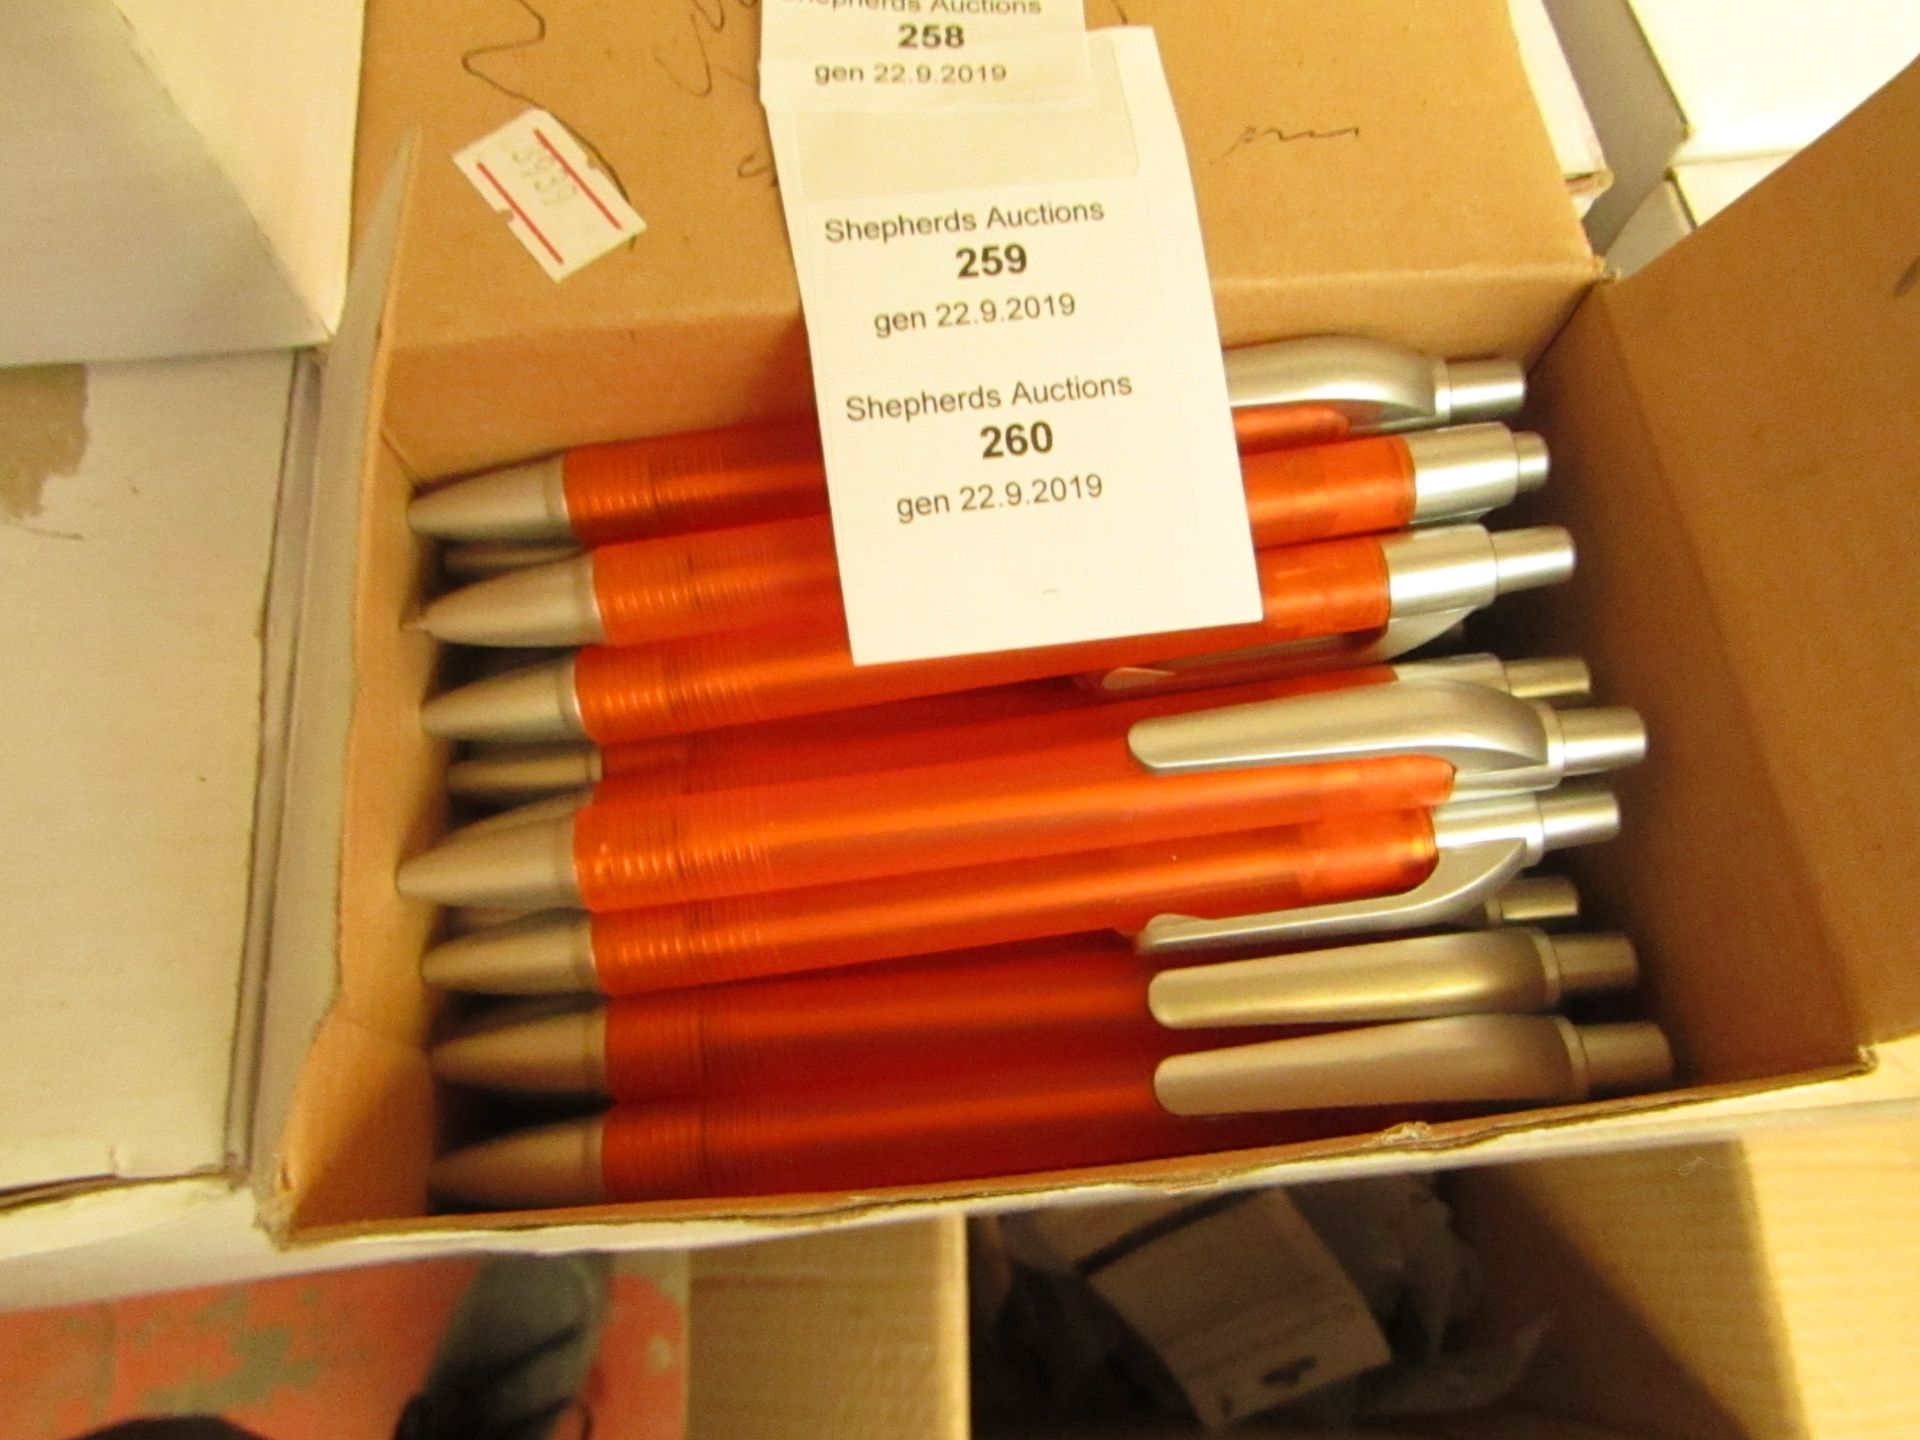 1 x  Boxes of Approx 50 Orange pens with Black Ink. (Randomly tried and found to be tested working)